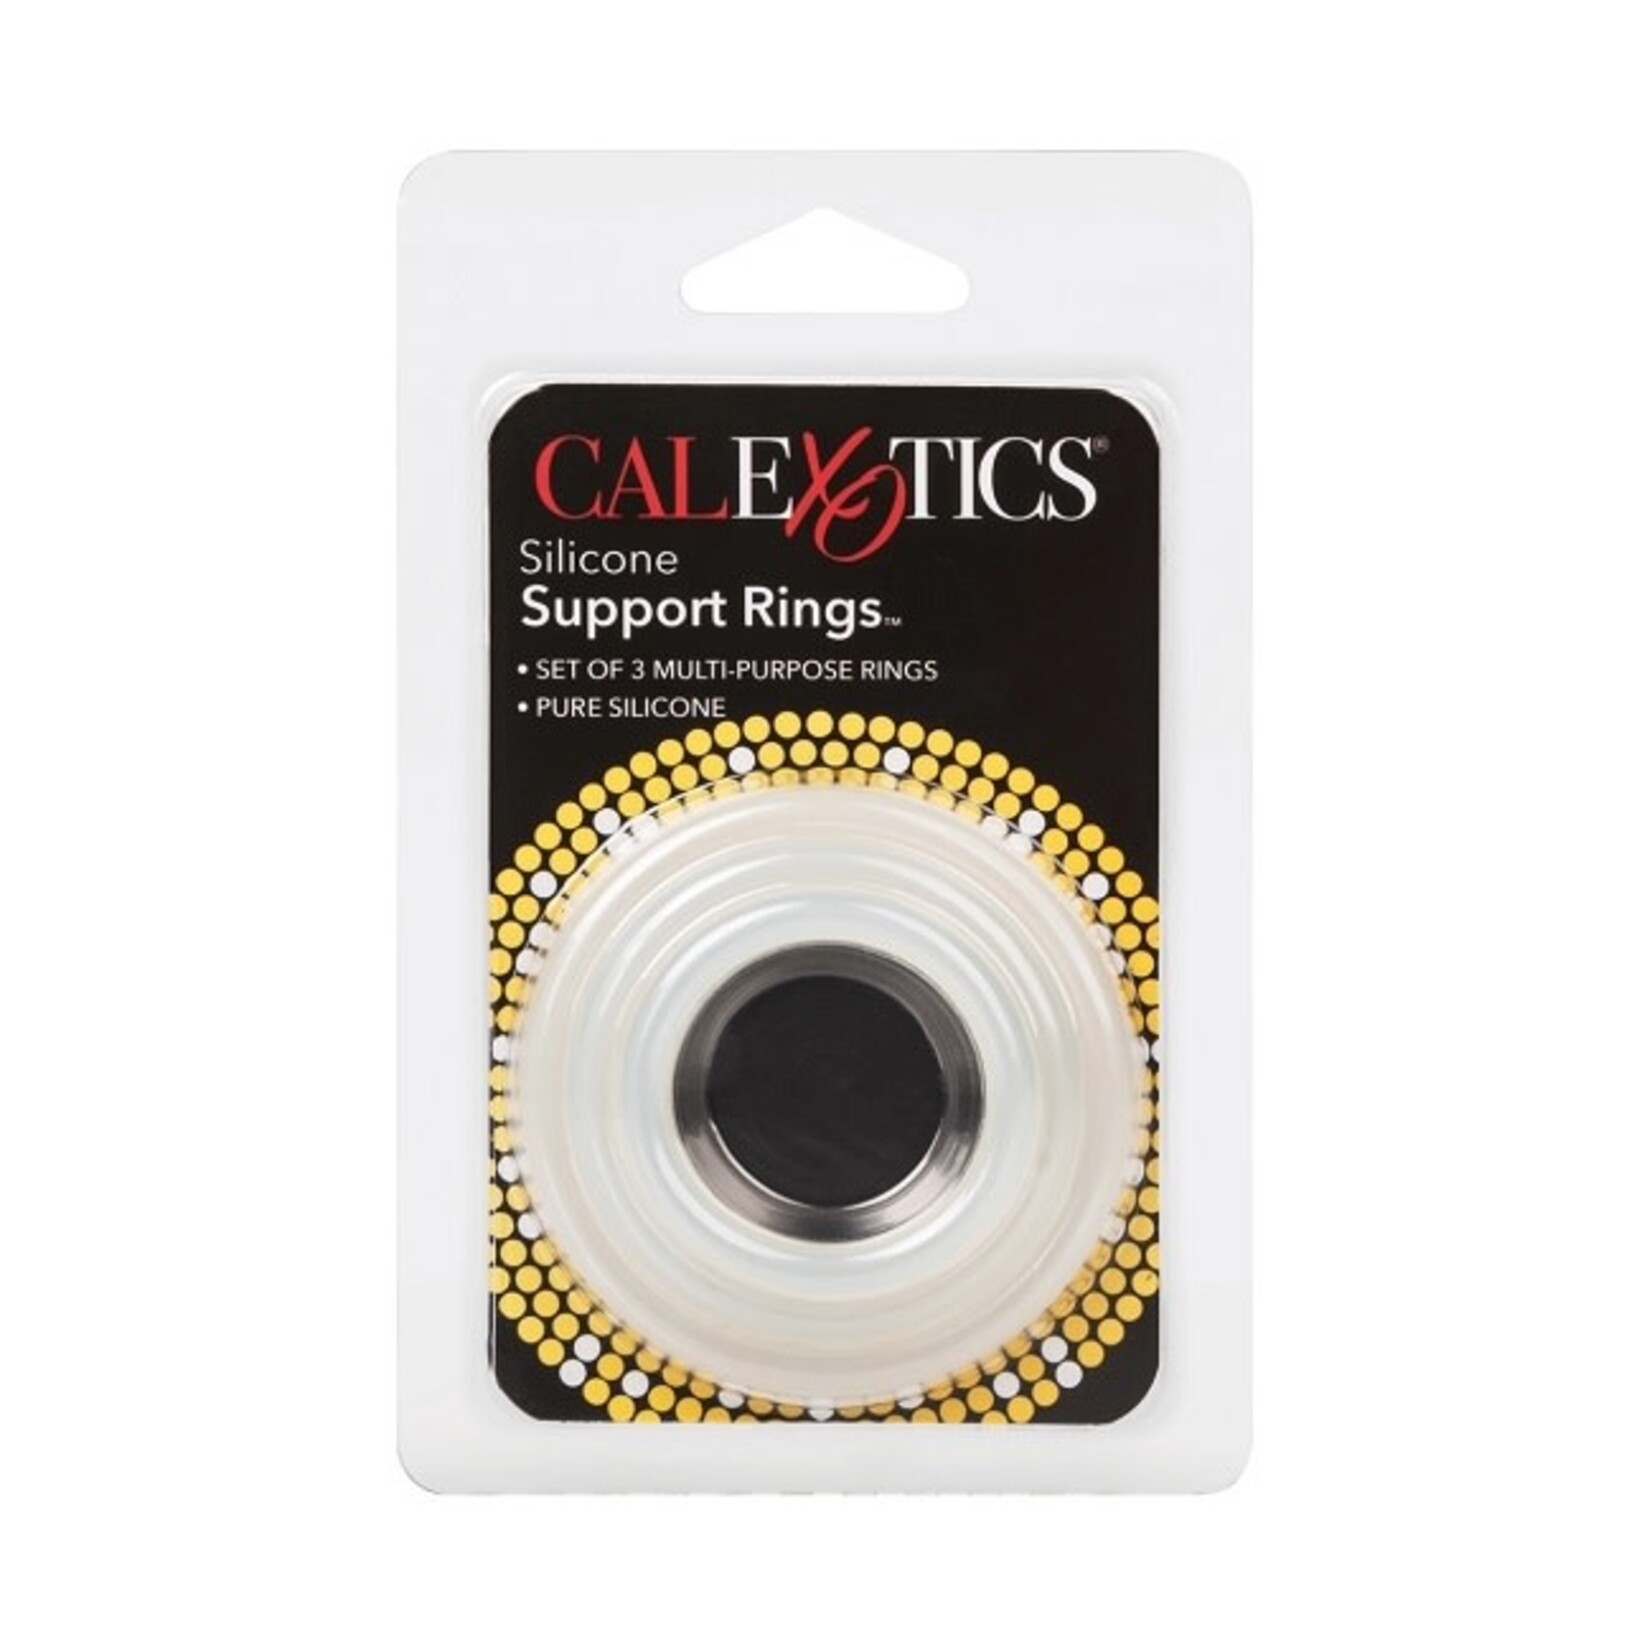 CalExotics Silicone Support Rings